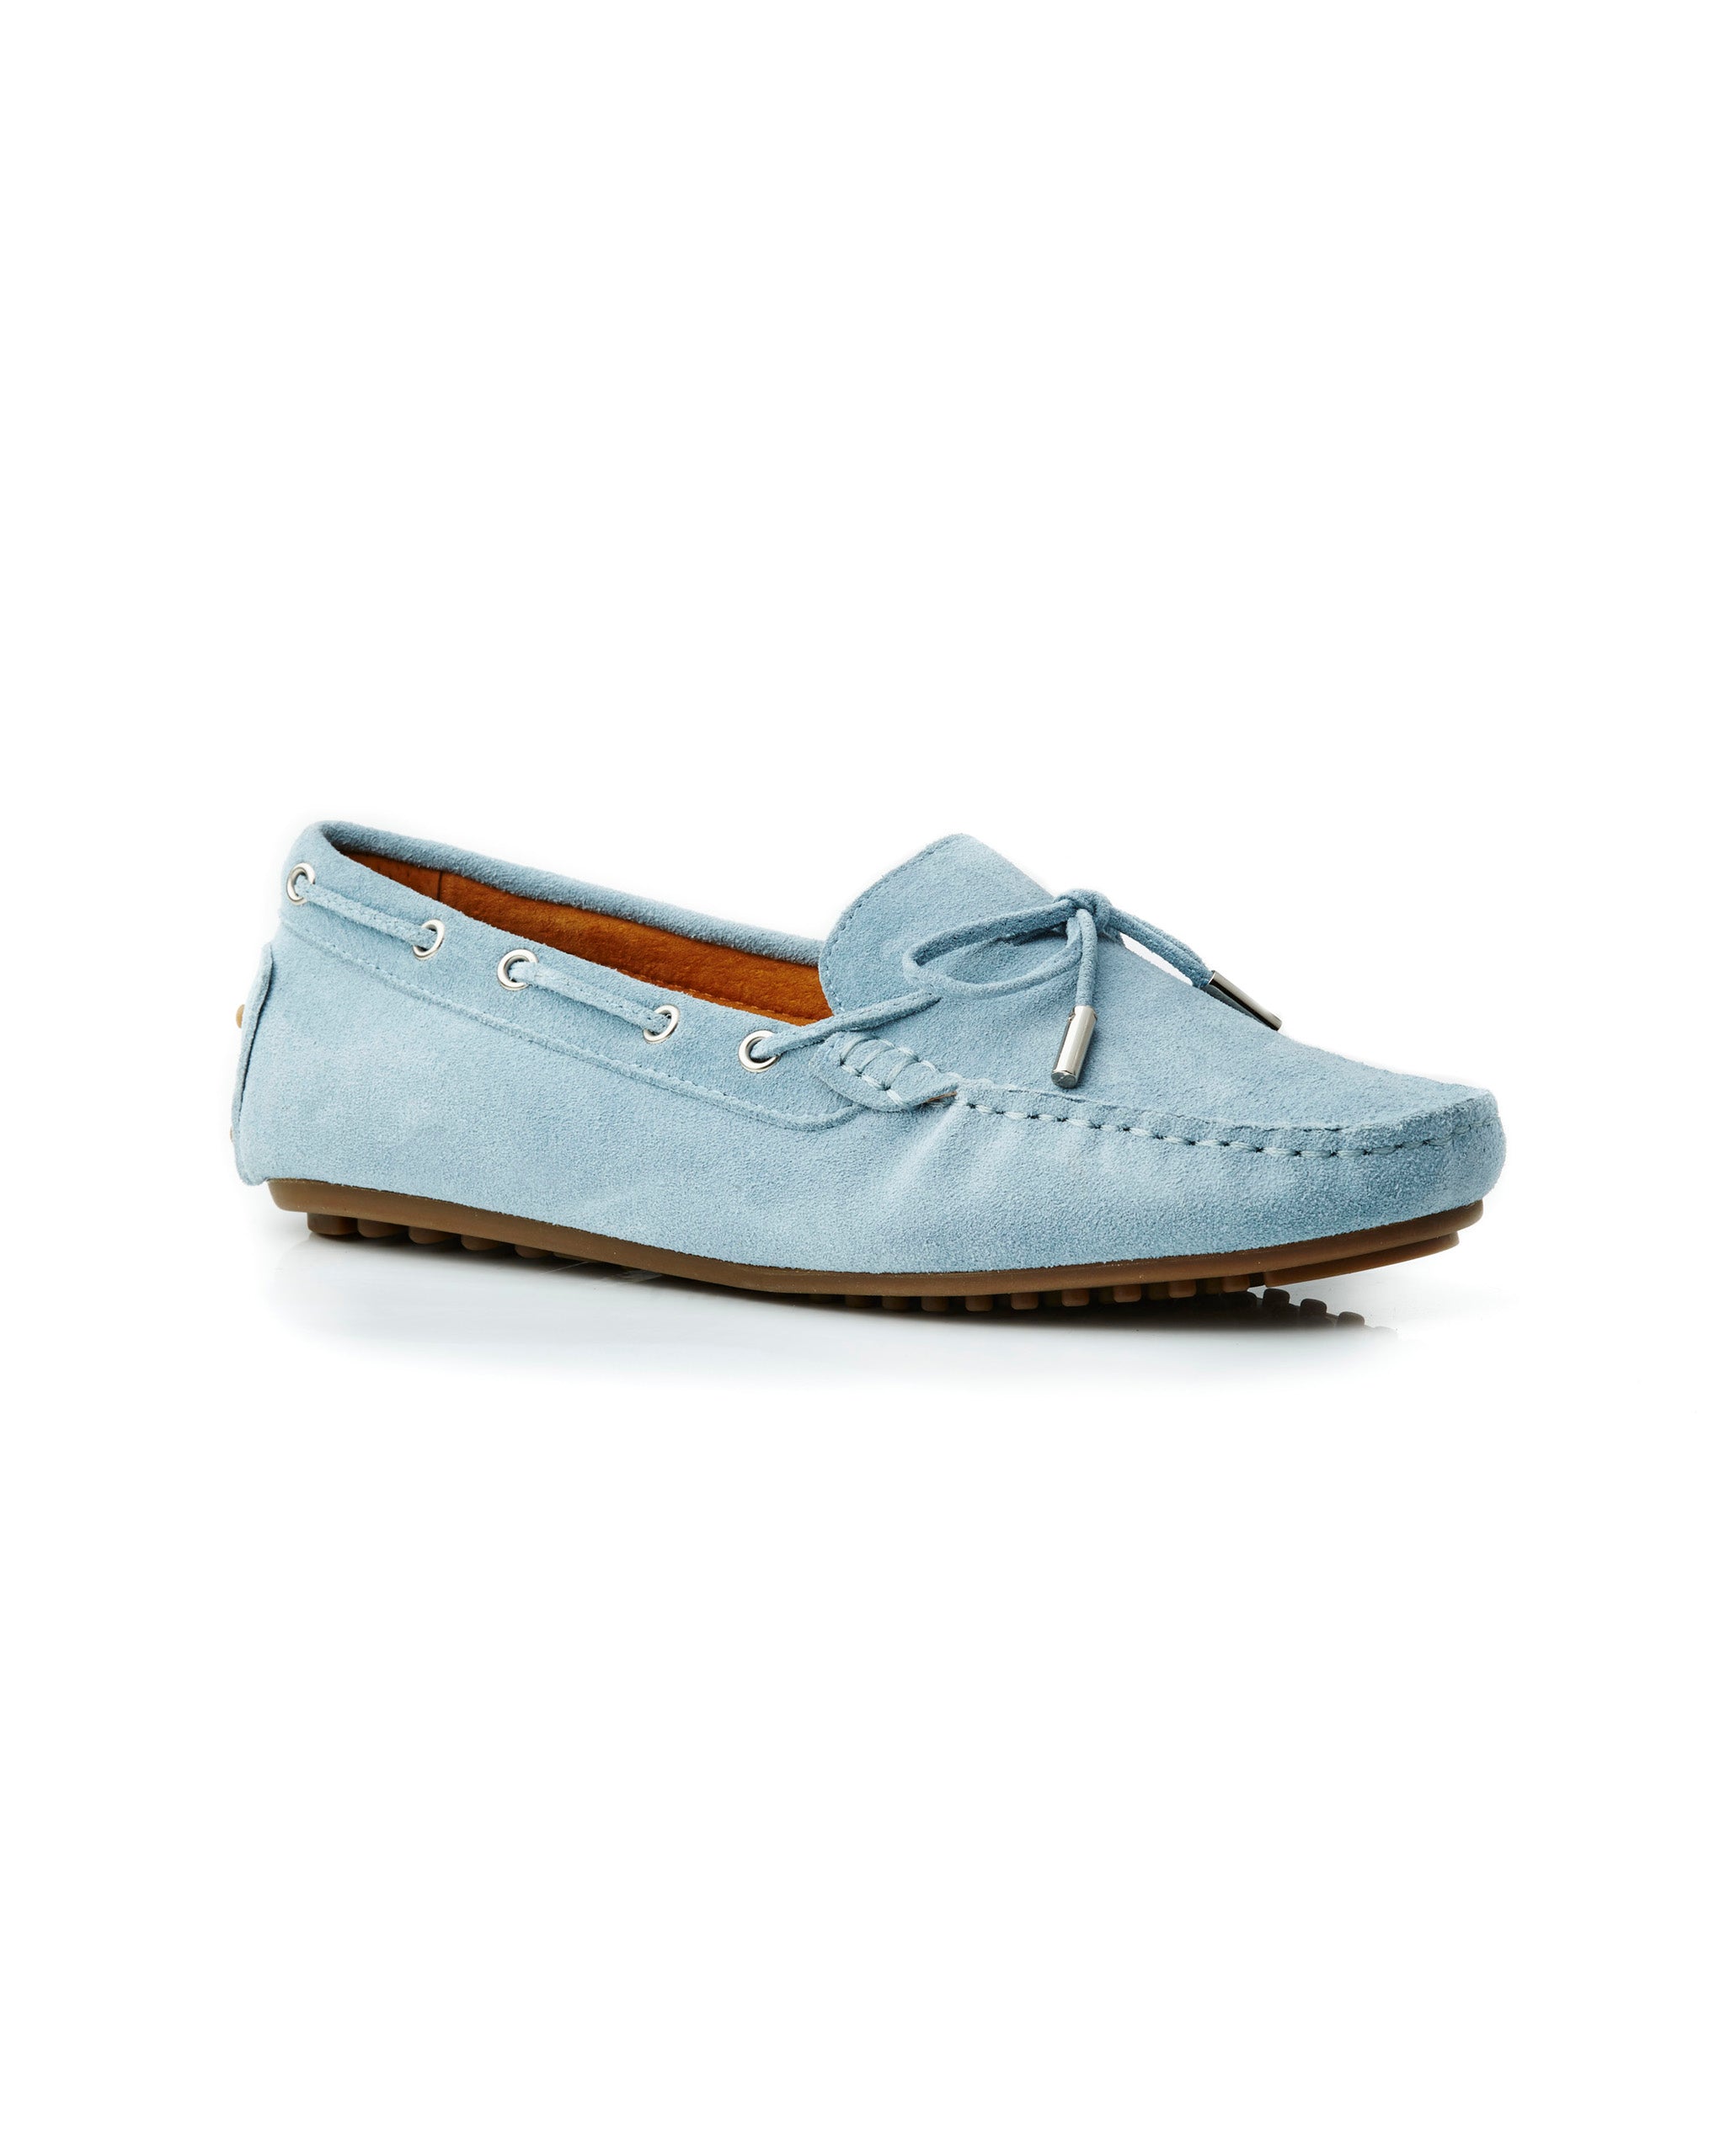 DARIA SUEDE LOAFER Pale Blue Side View